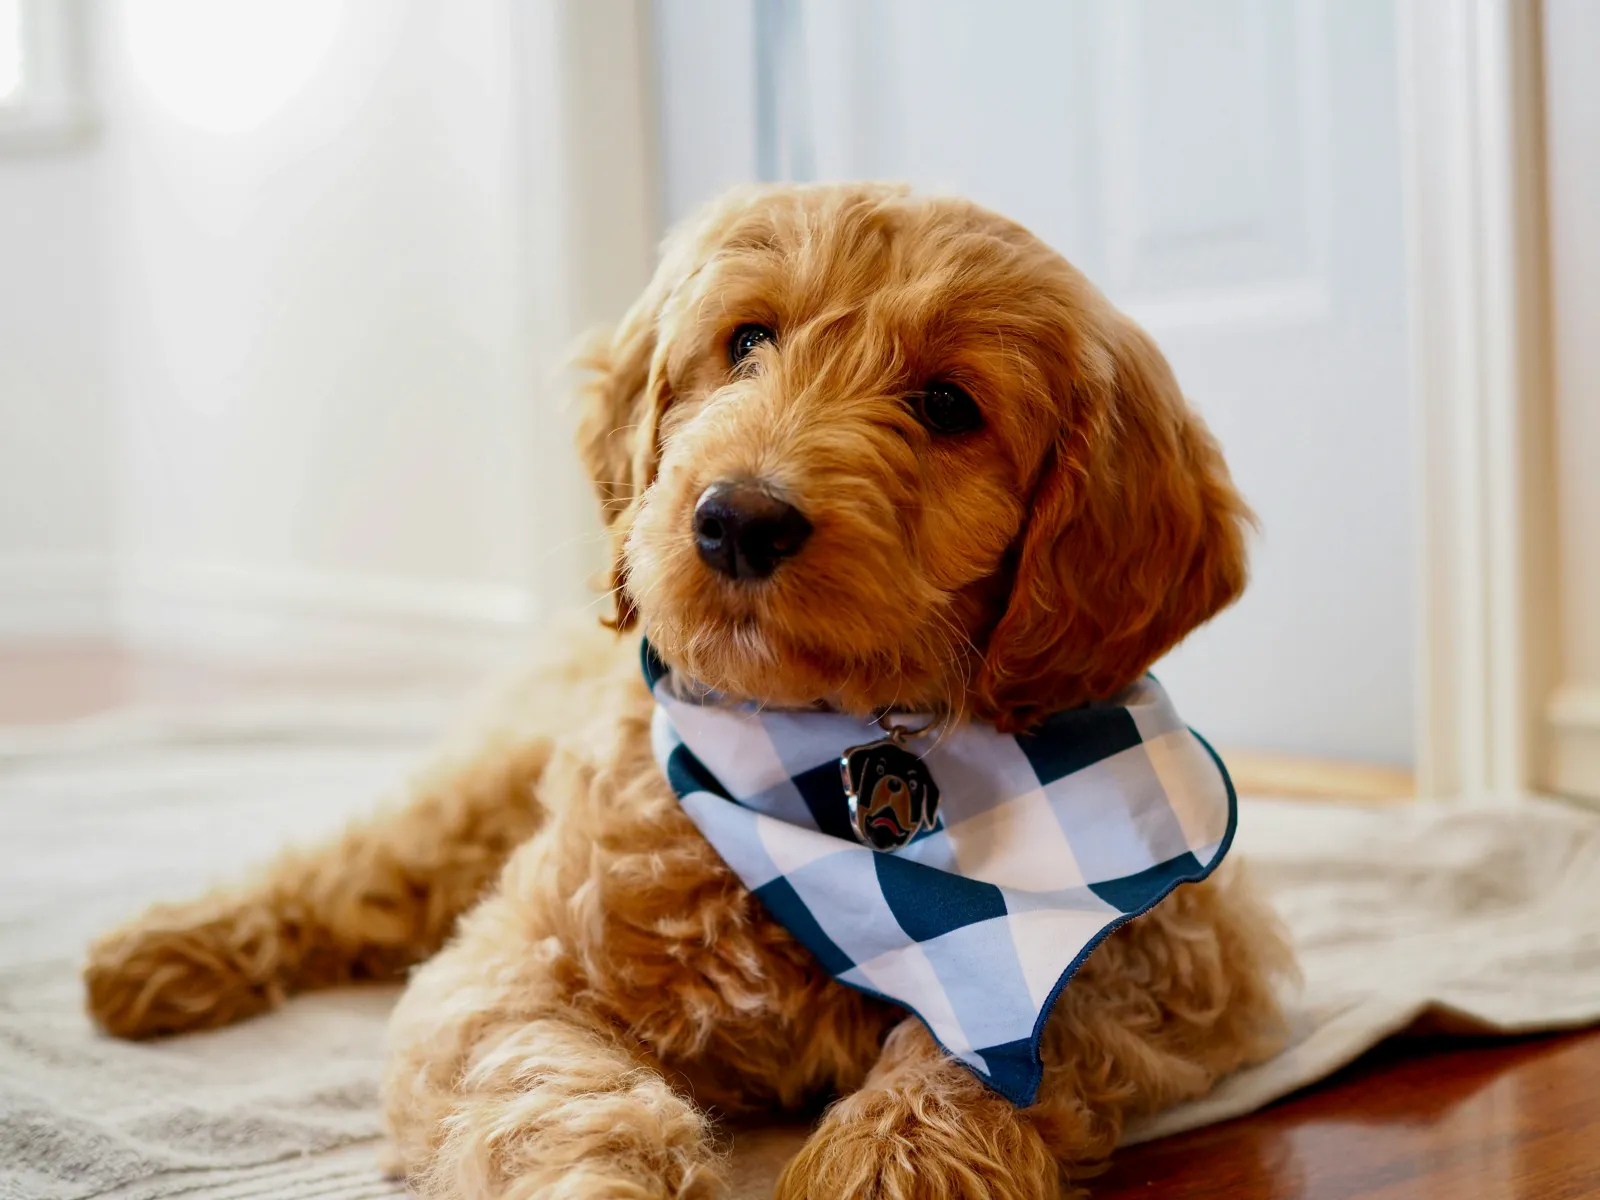 a Goldendoodle puppy, a hypoallergenic dog breed, with a blue and white checkered bandana around its neck as it sits on a rug on the hardwood floor